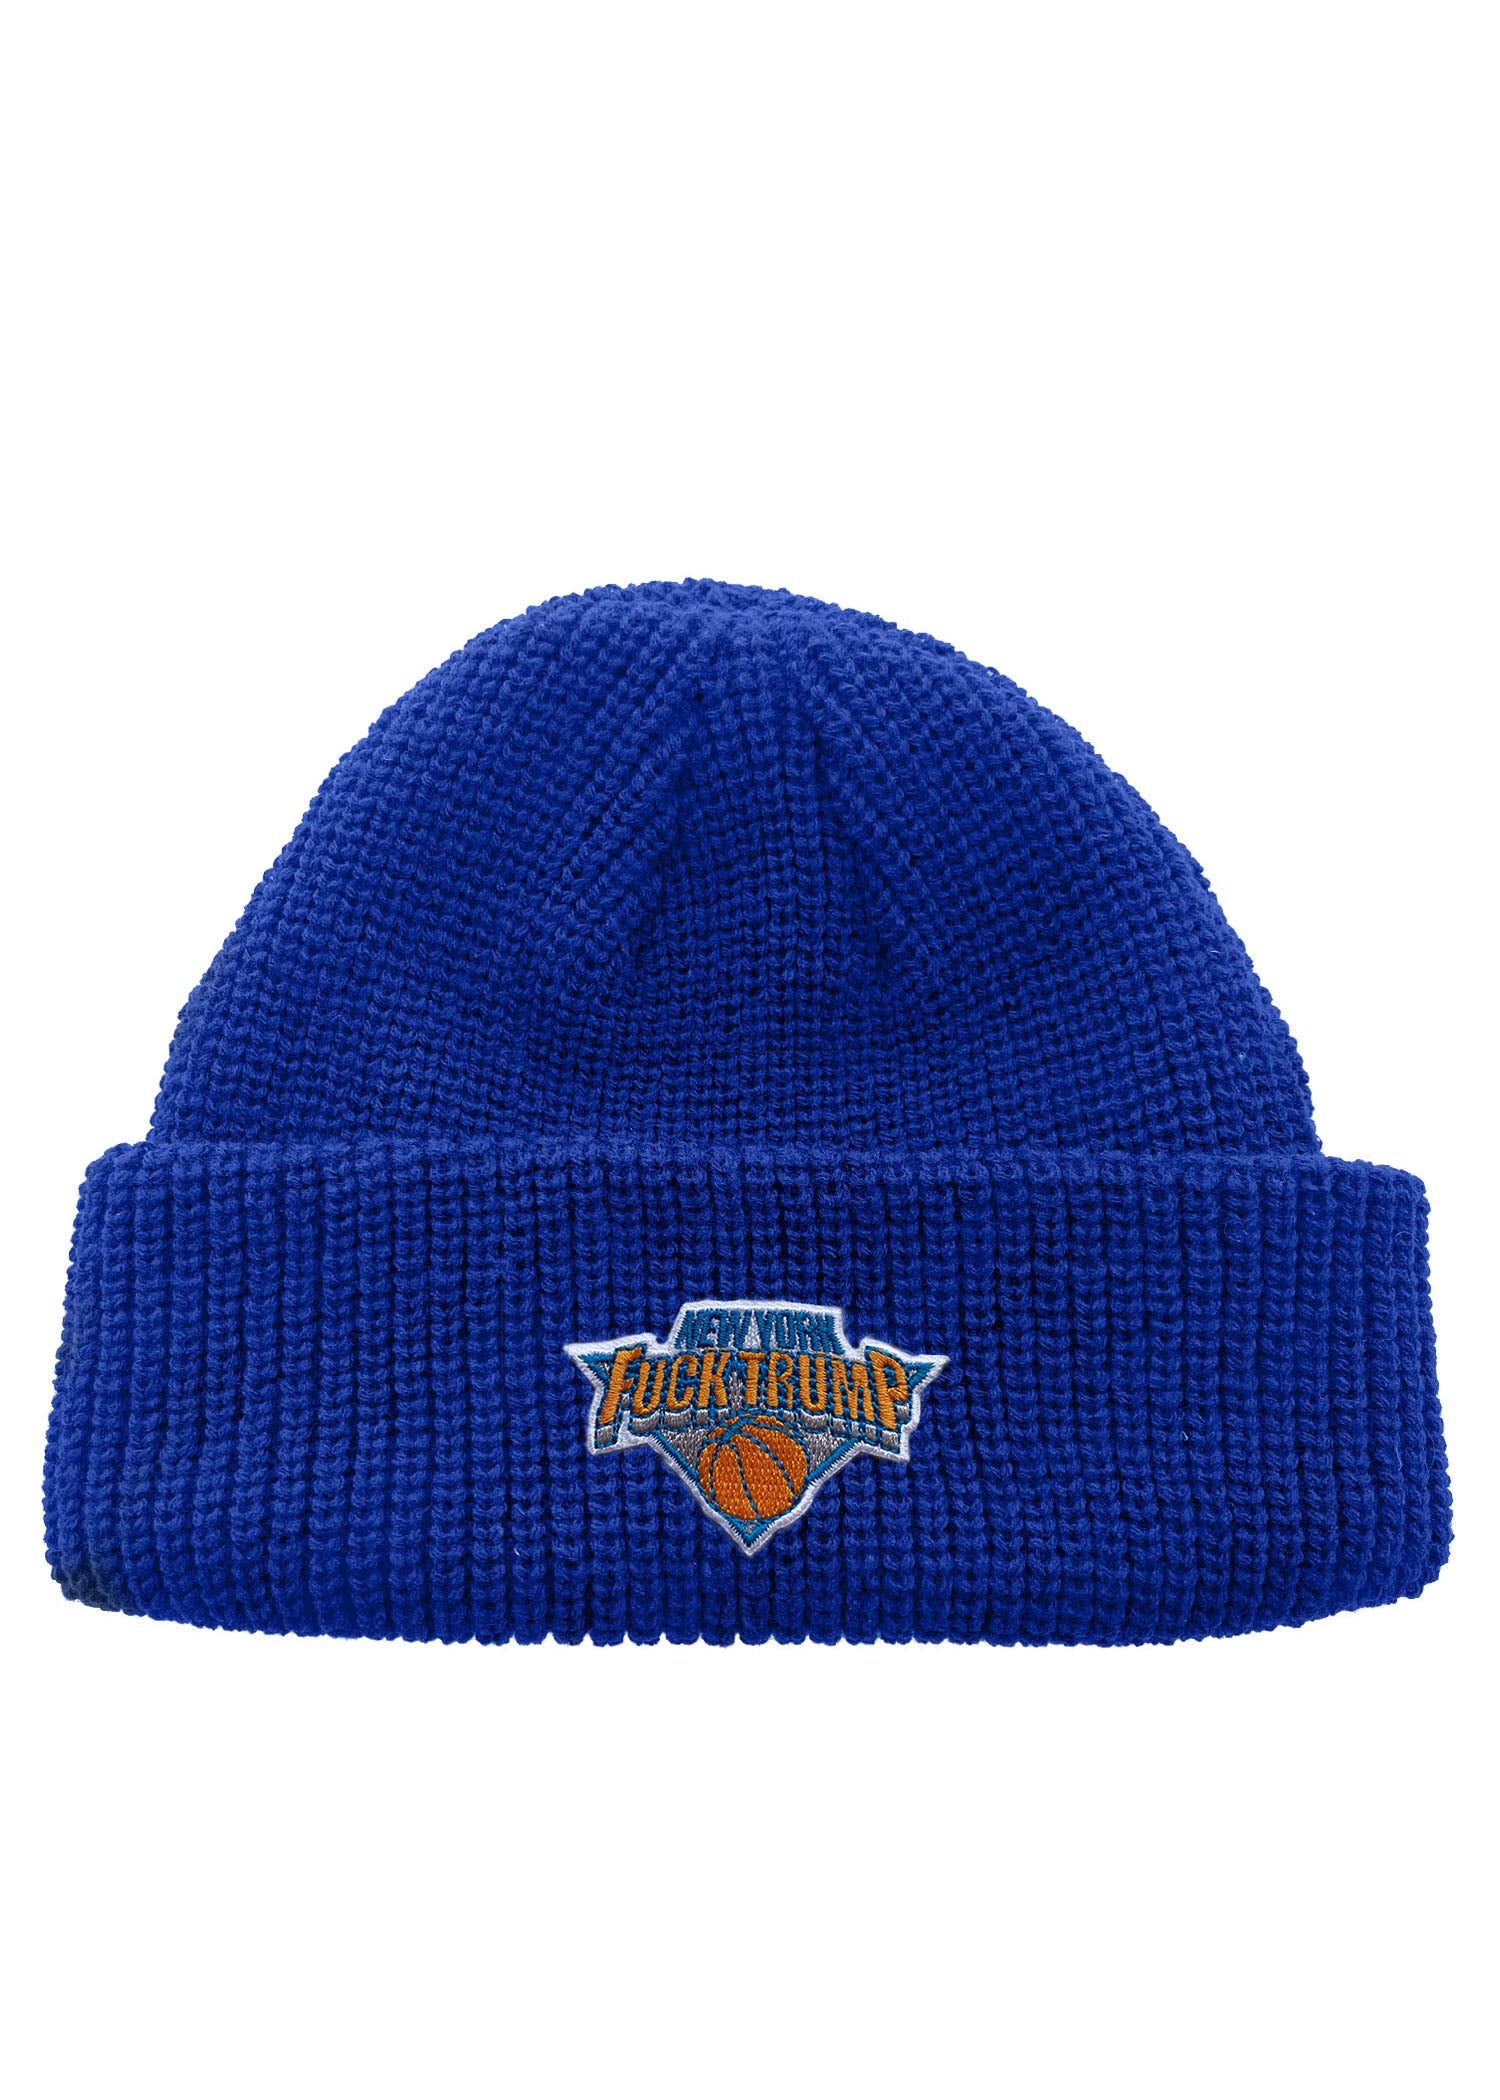 Fuck Trump NY Hoops Patch Neon Color Fisherman Knit Beanie